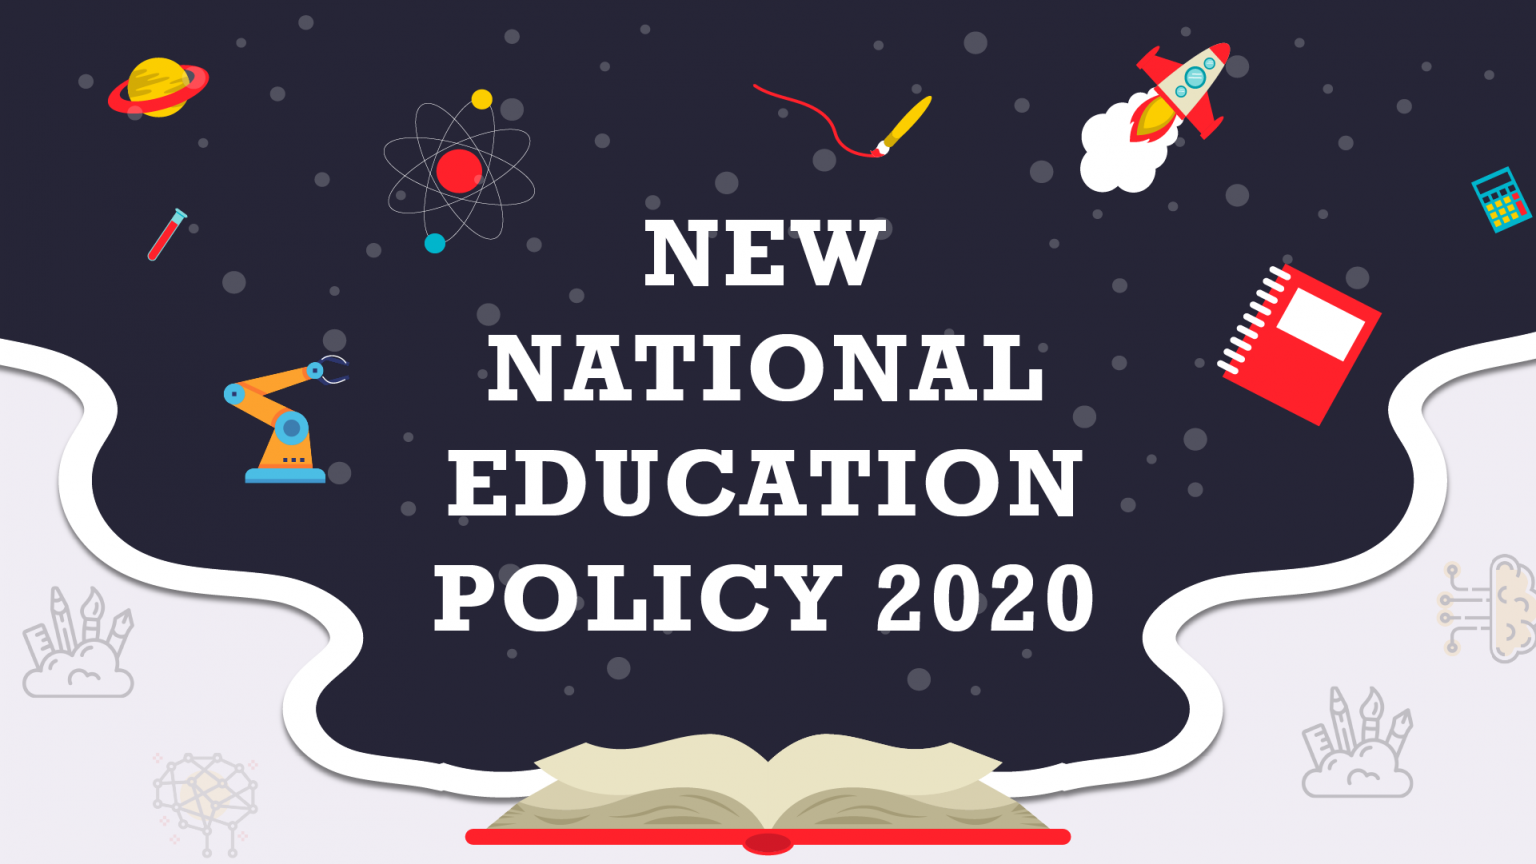 project on new education policy class 12